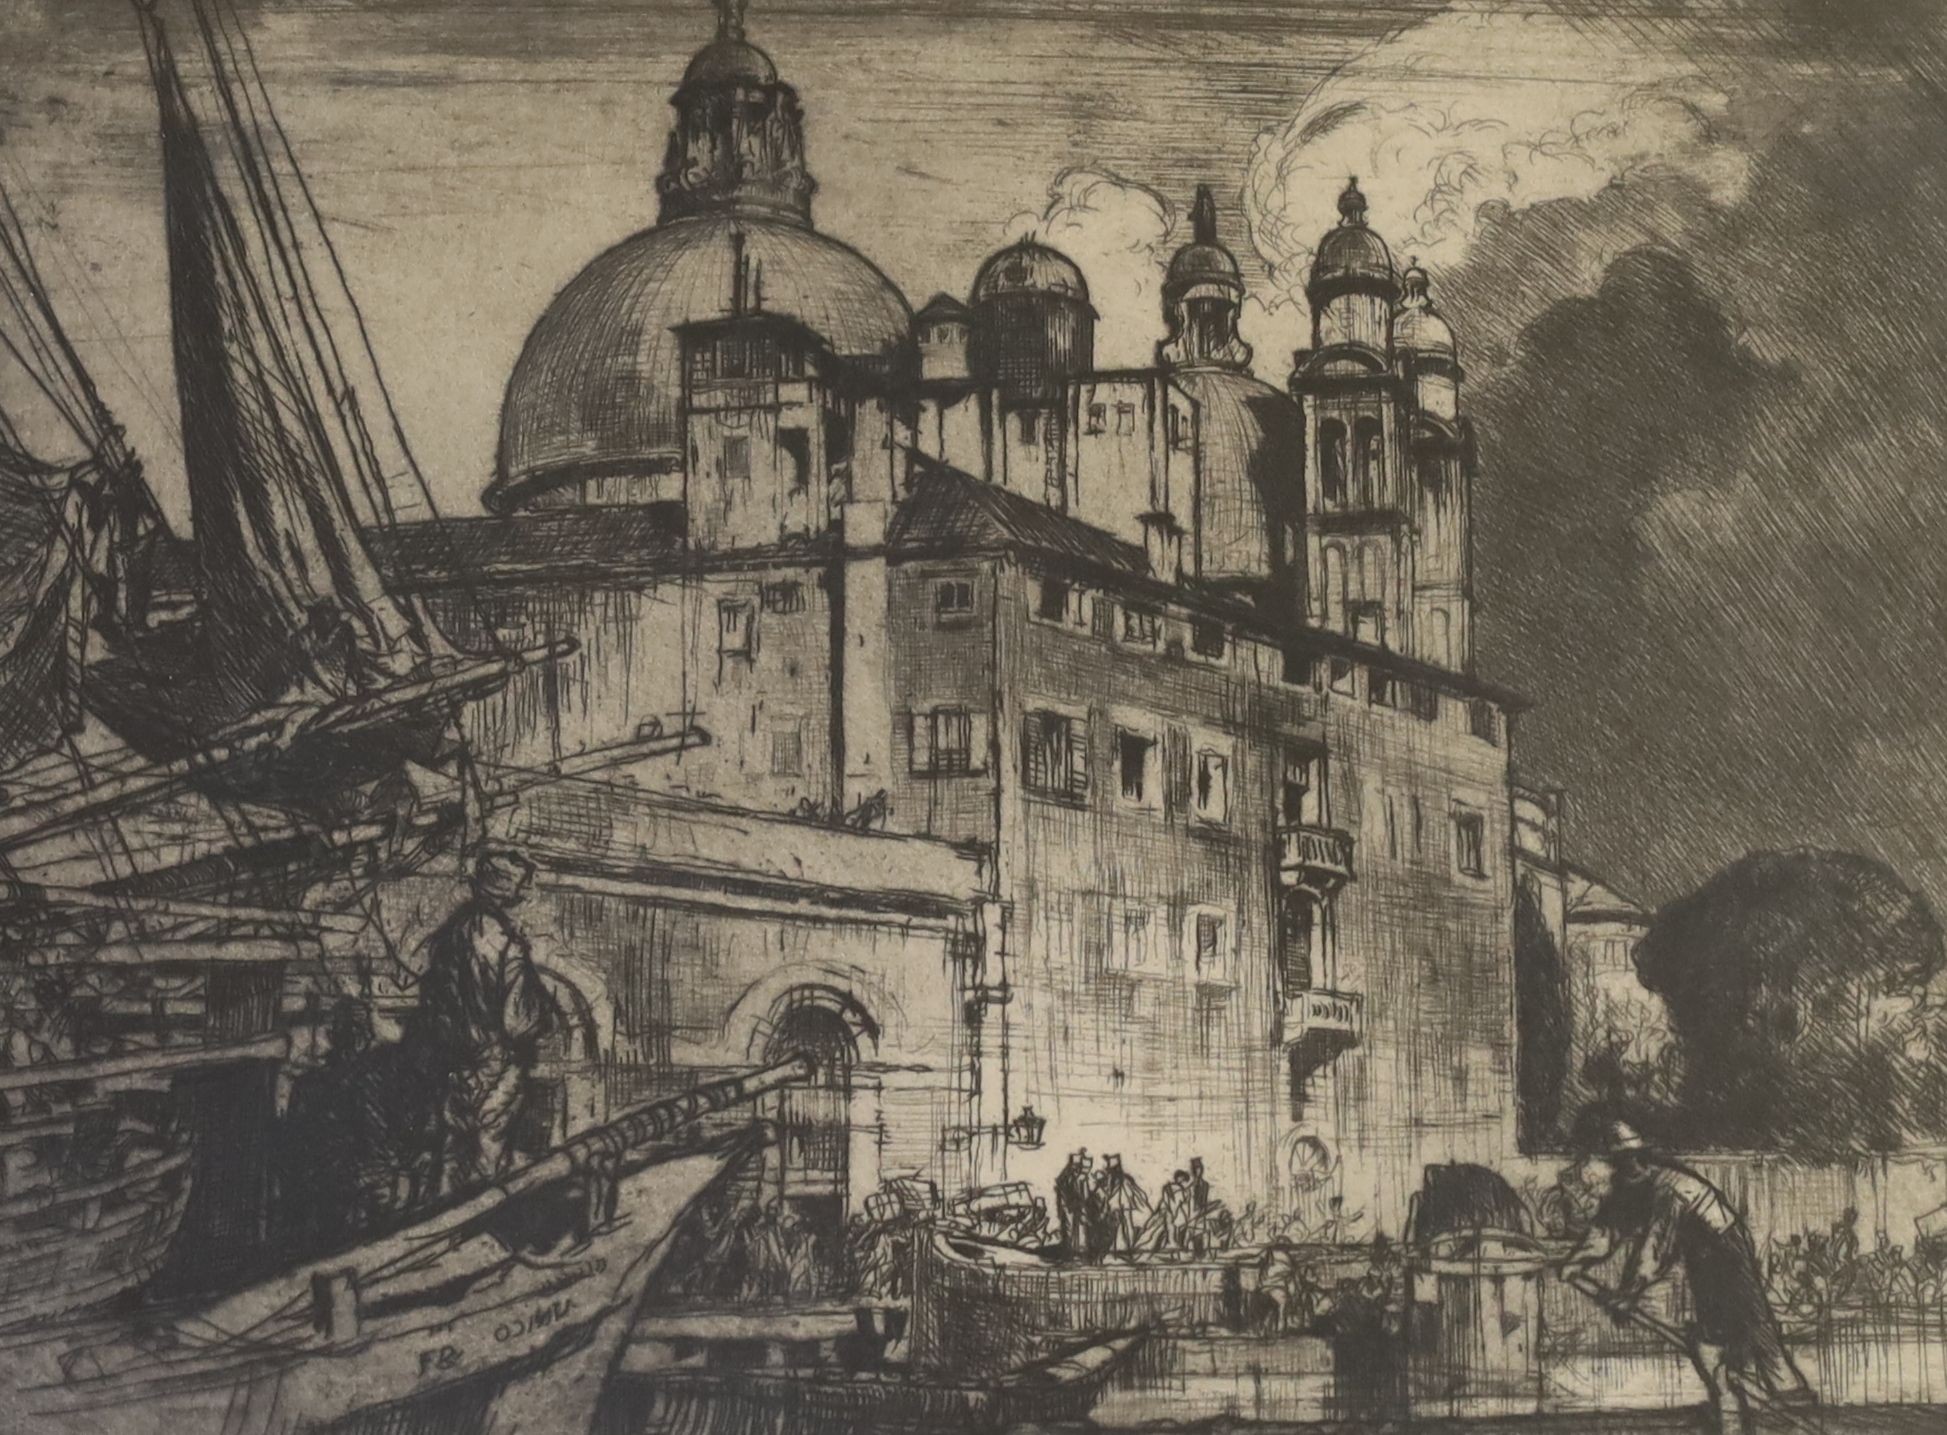 Frank Brangwyn (1867-1956), etching, The Salute from the Giudecca, signed in pencil, 28 x 36cm